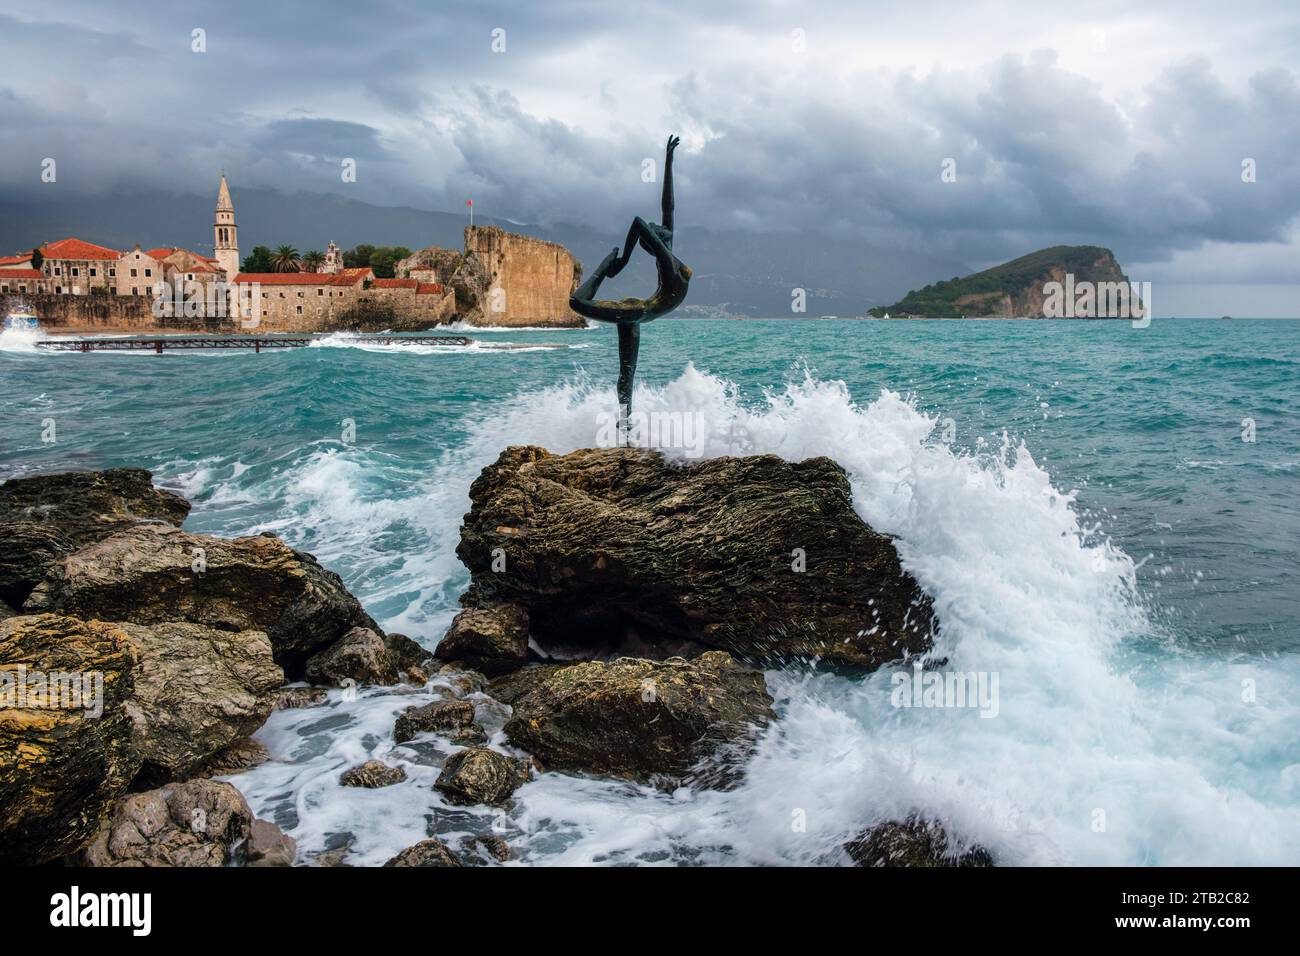 The Mogren Ballerina Statue and view to Budva Old Town on a stormy day, Montenegro Stock Photo